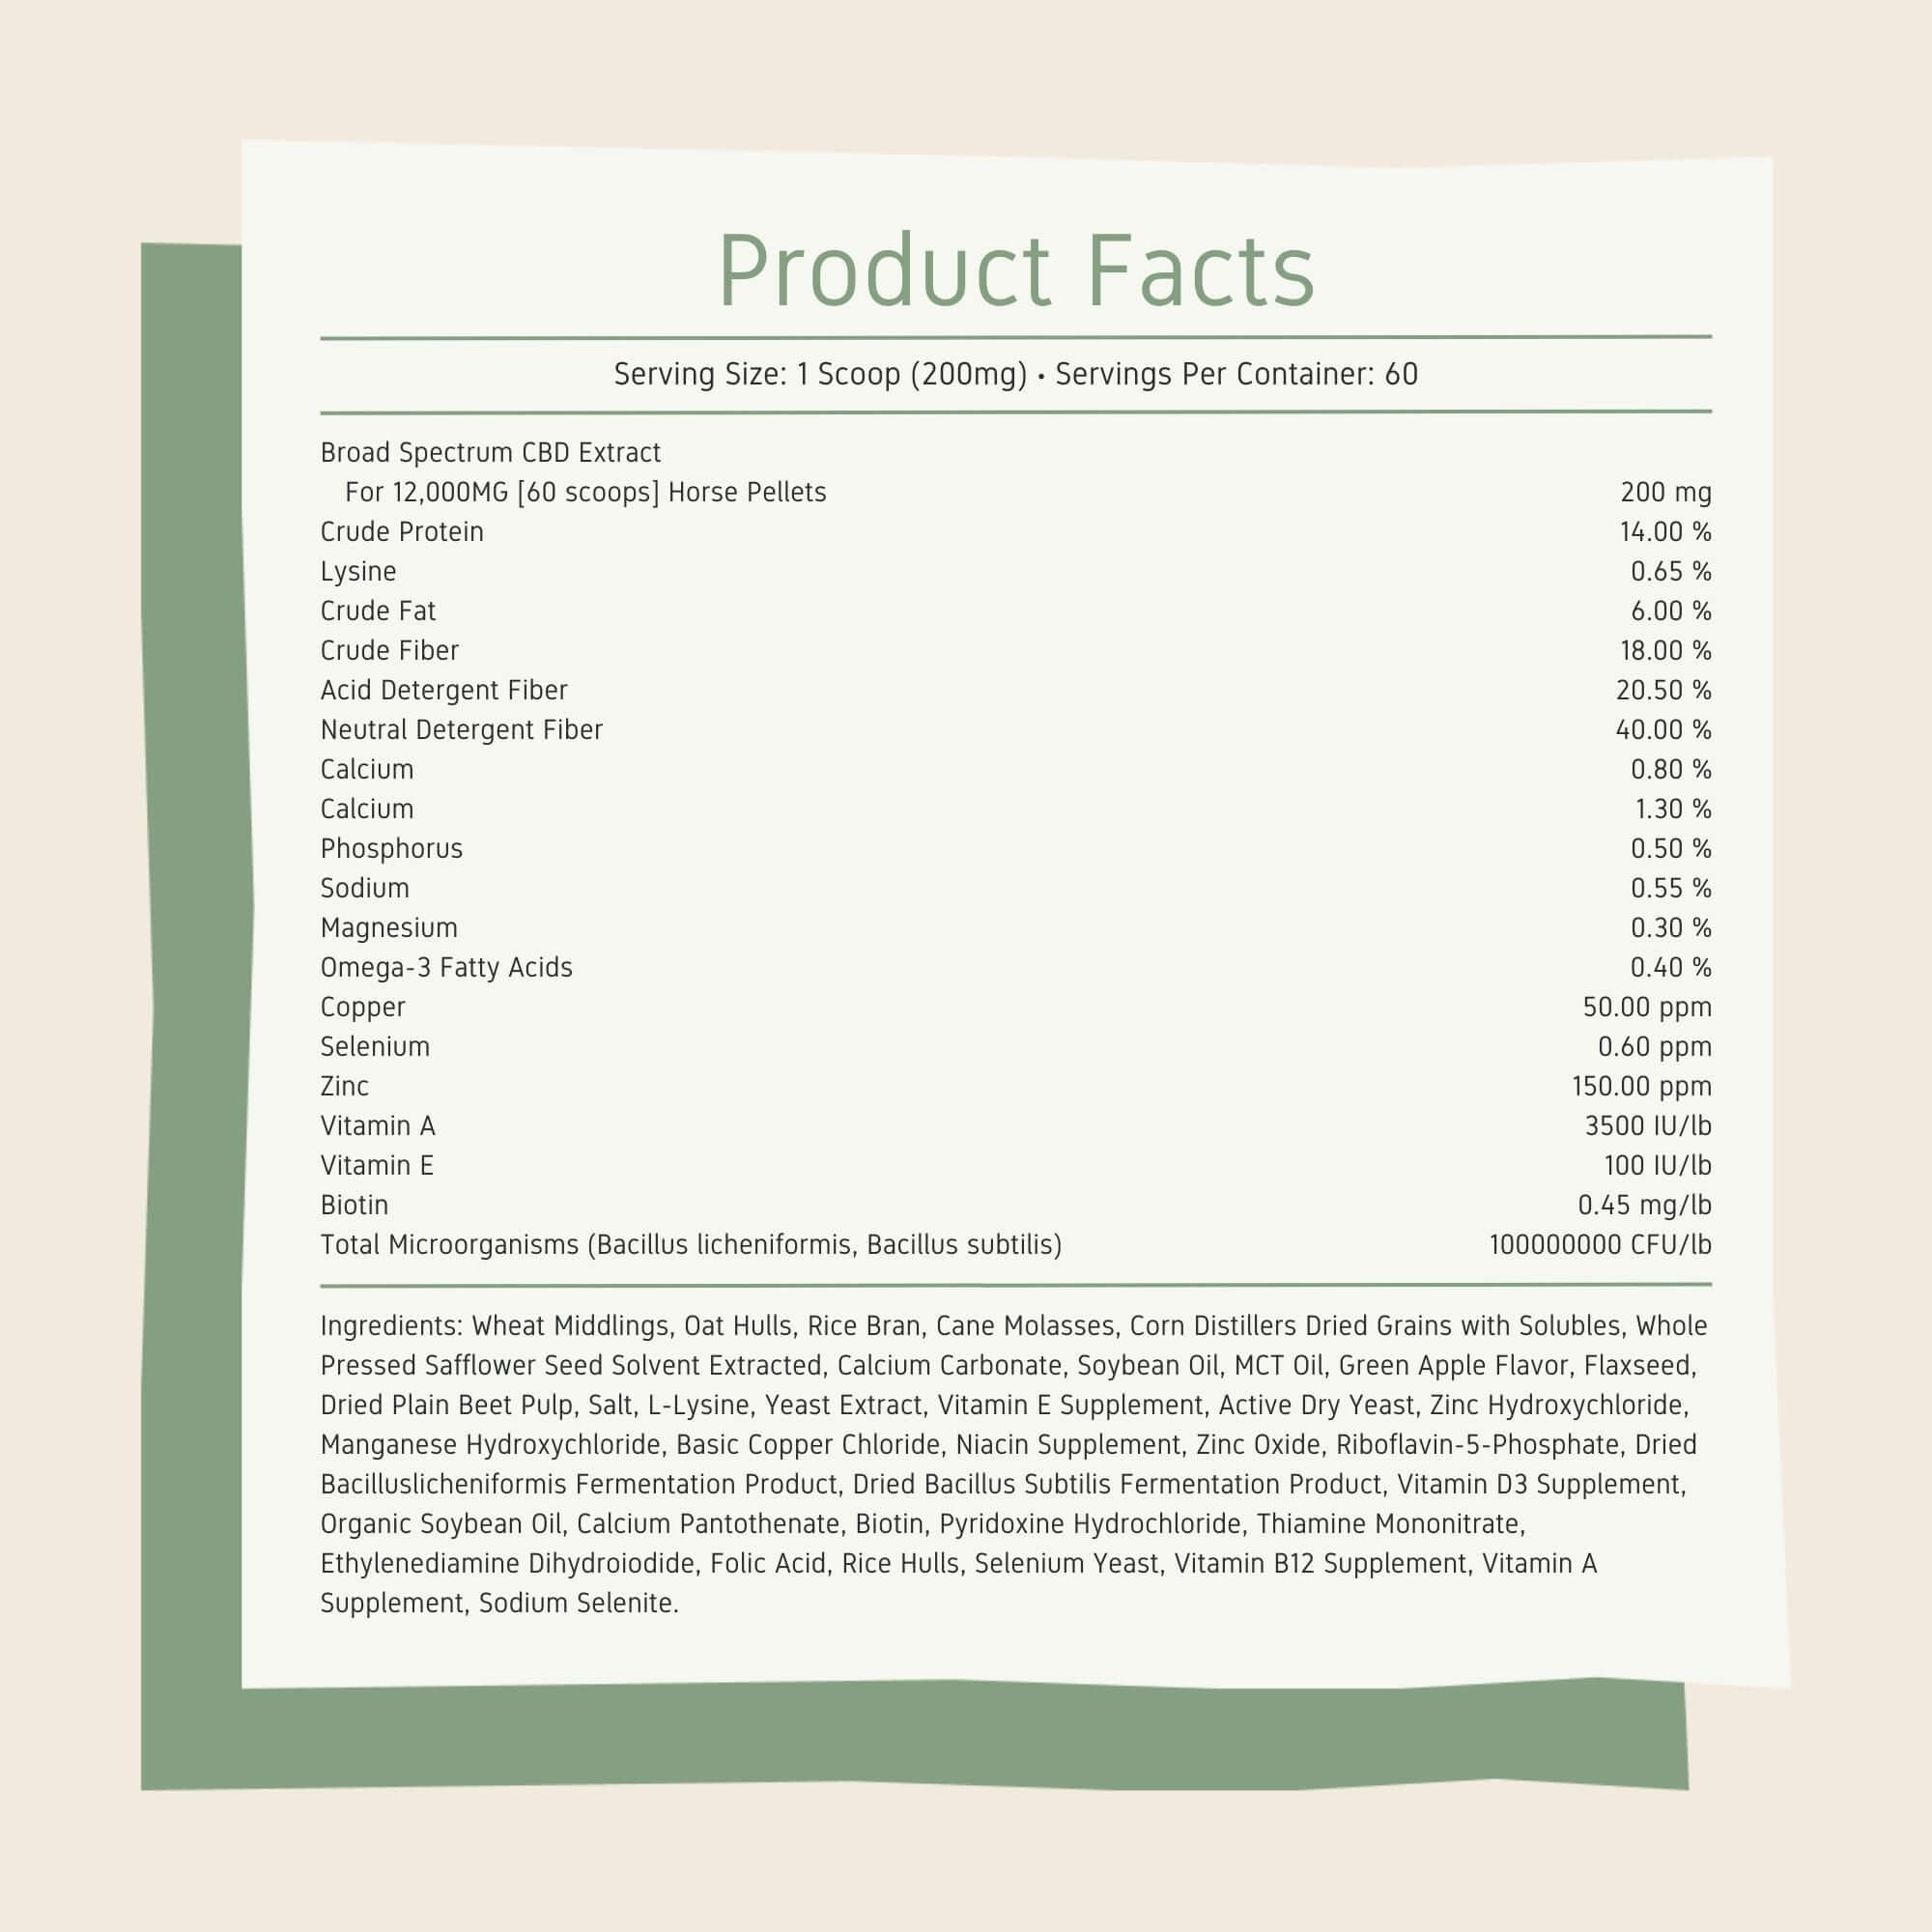 Broad Spectrum CBD Horse Pellets 12000mg product facts and full list of ingredients